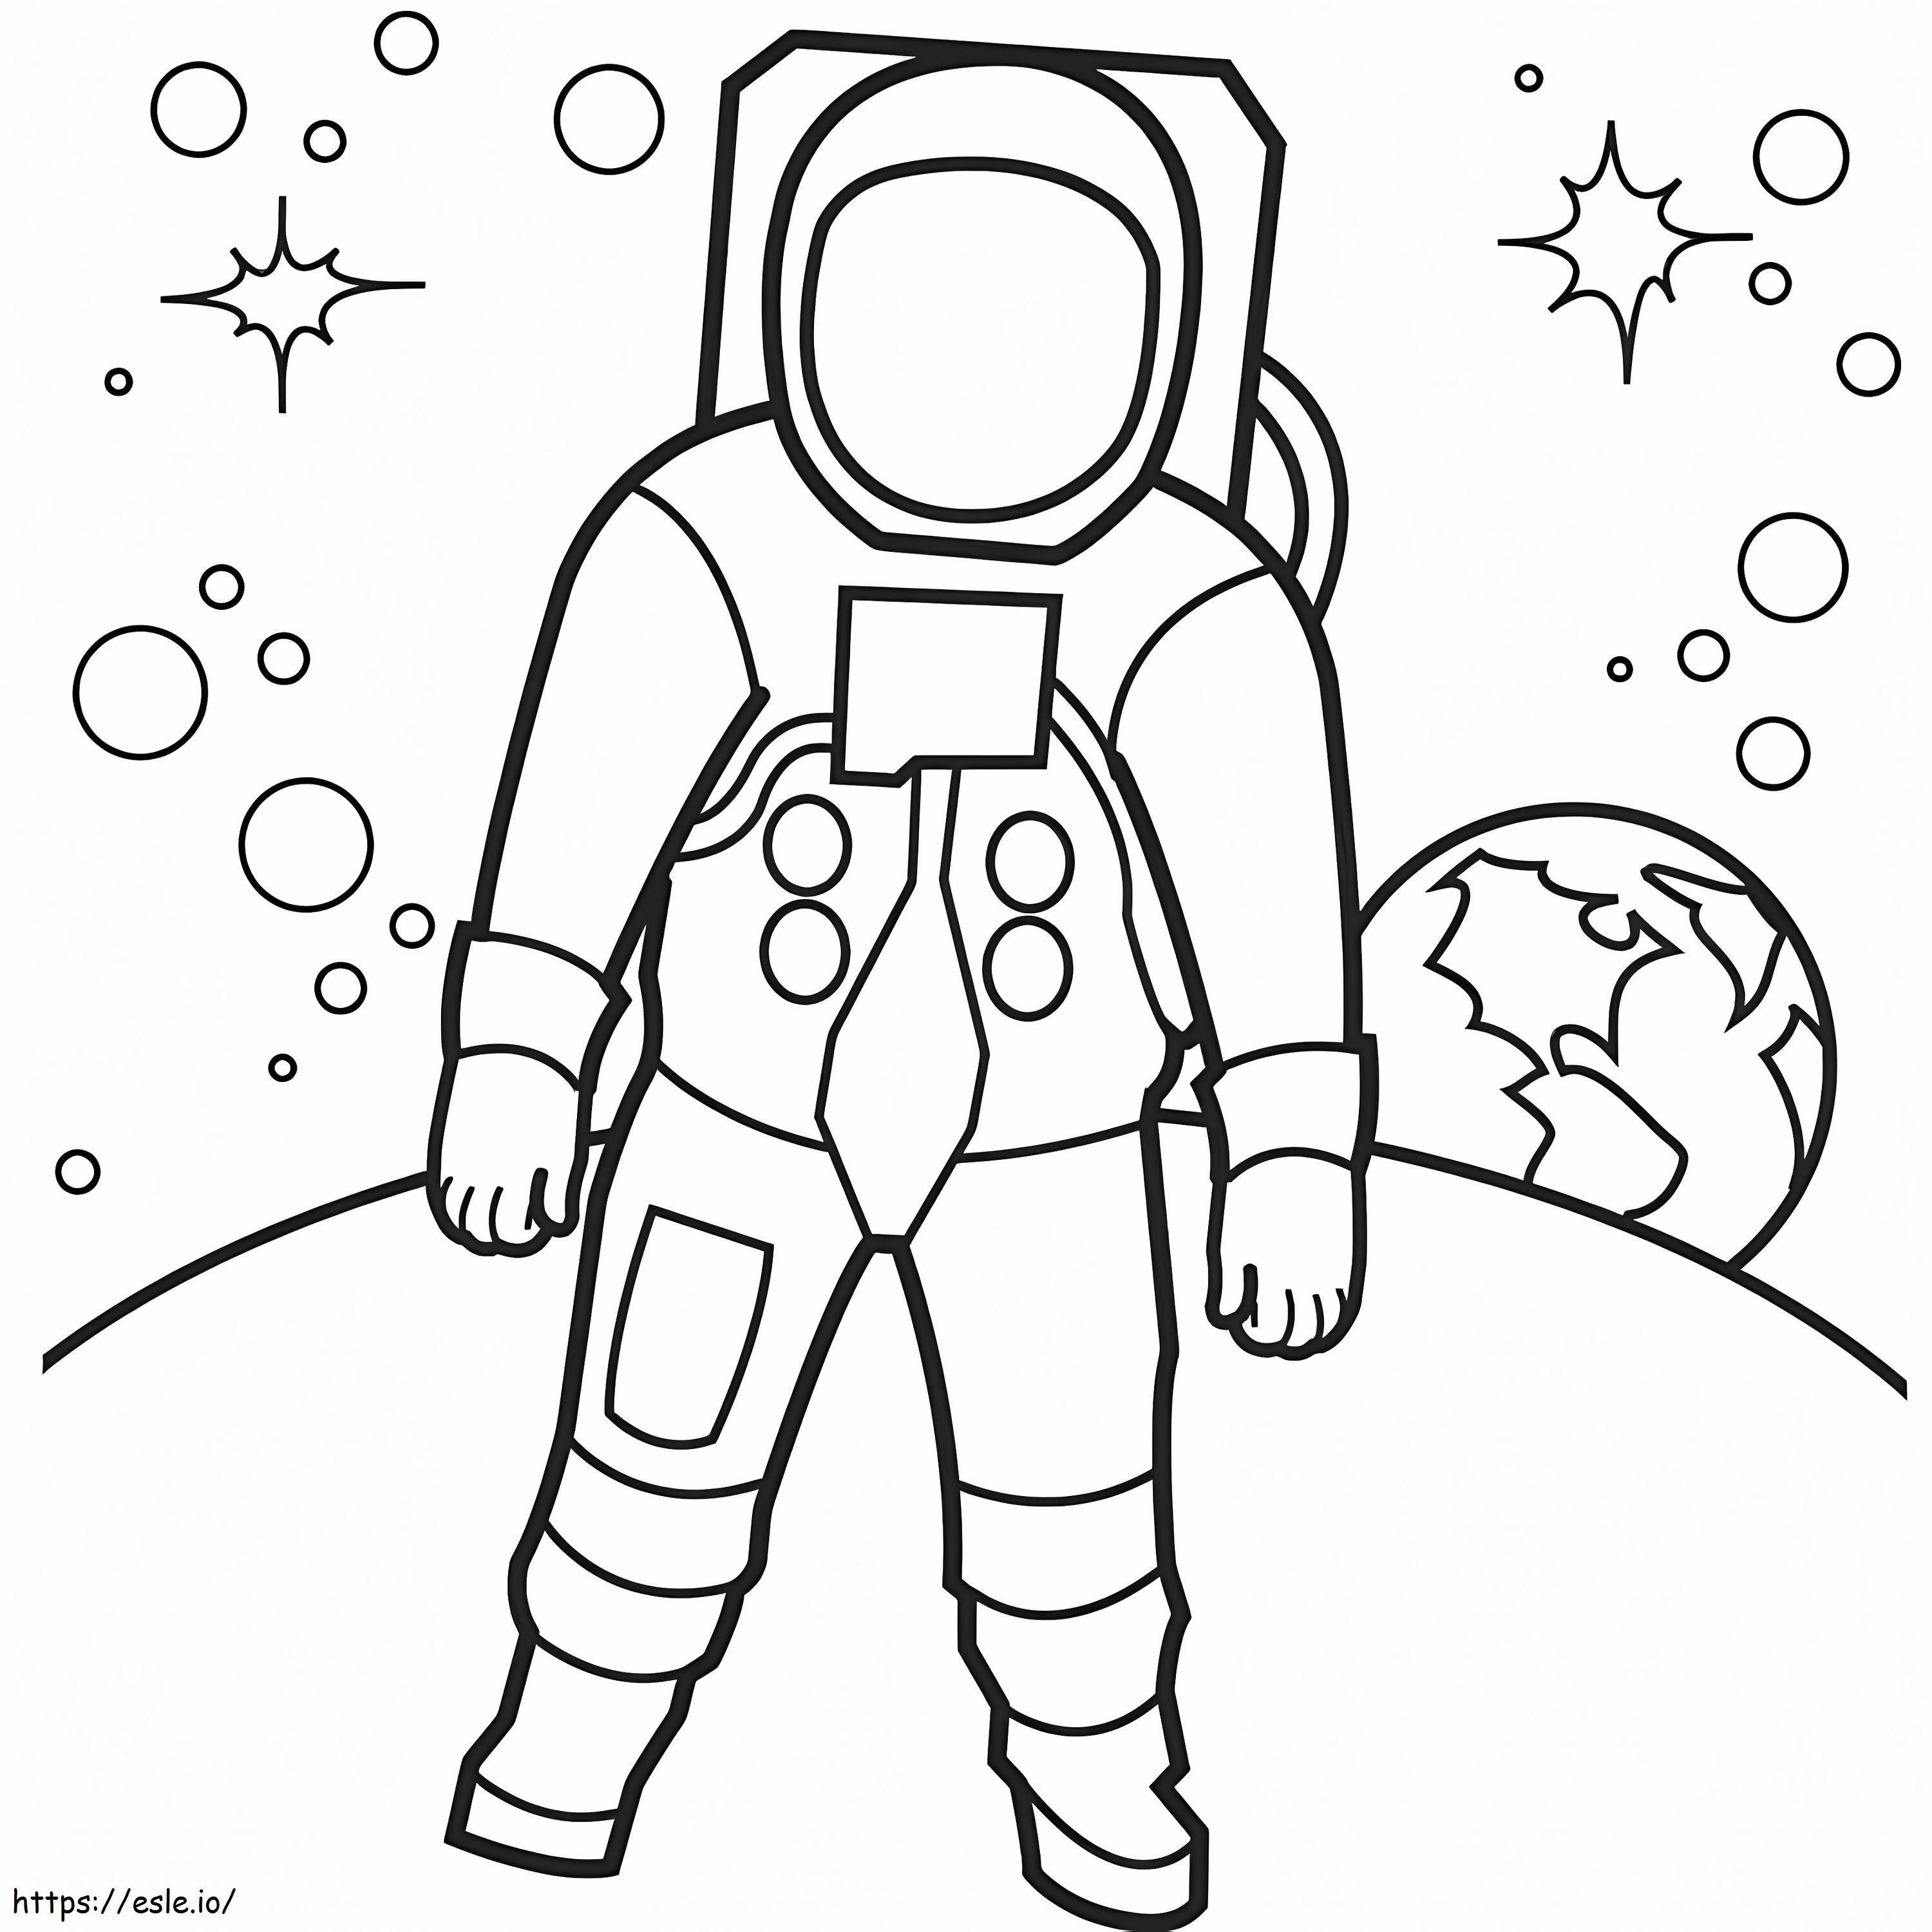 Astronaut Standing On The Planet coloring page